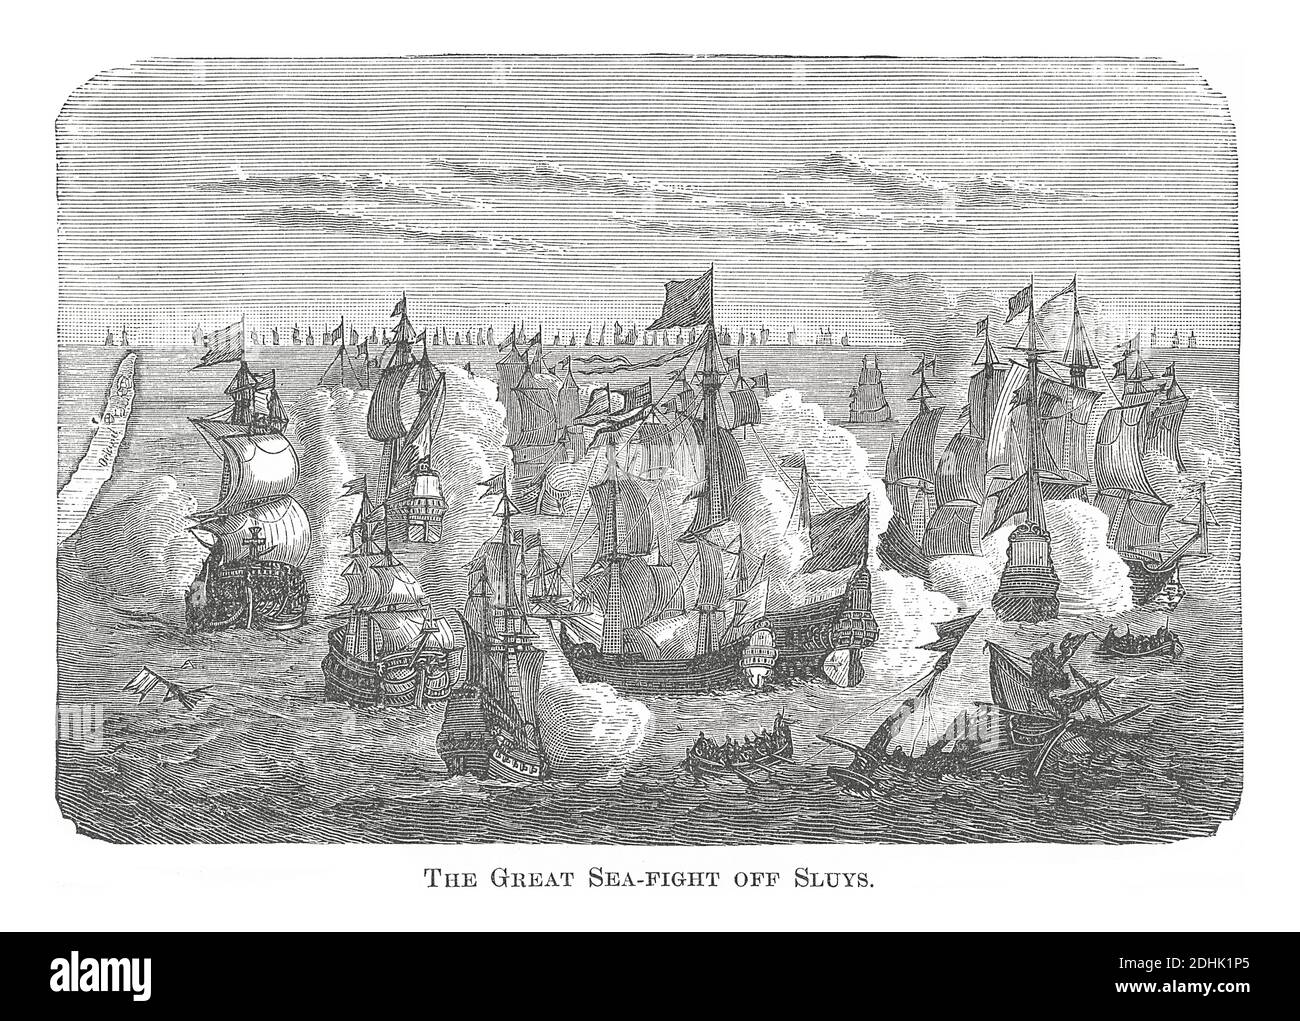 19th-century illustration of the great battle of Sluys, fought on 24 June 1340 and one of the opening conflicts of the Hundred Years' War between Engl Stock Photo